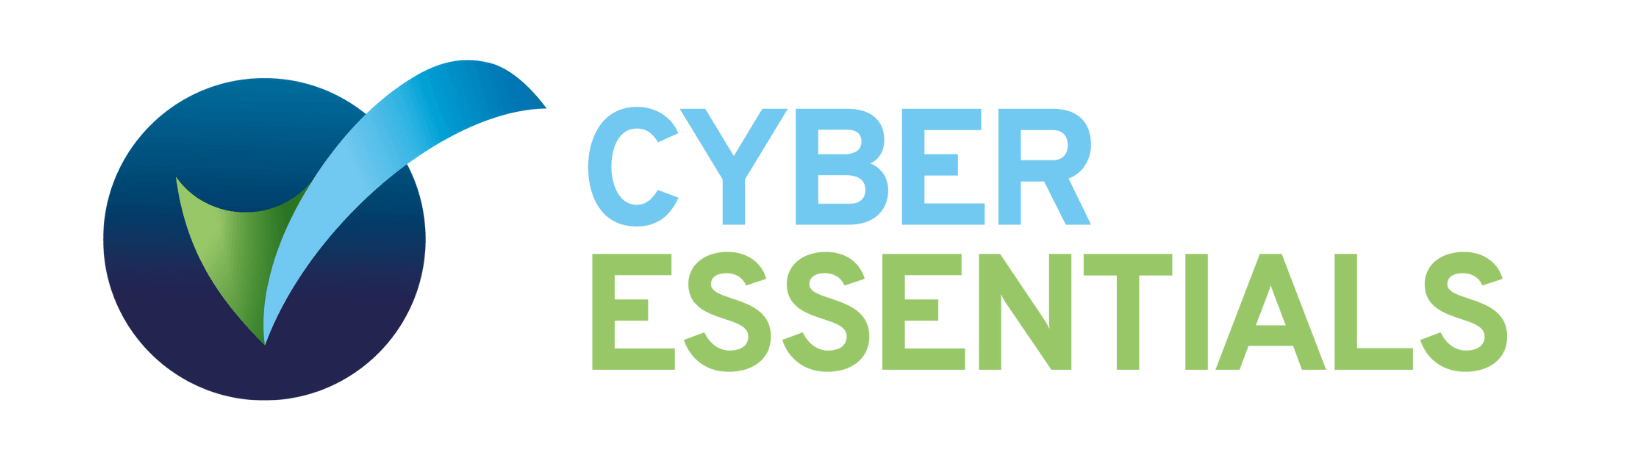 Cyber Essentials ISO27001 2017 ISO 27701 2019 NHS